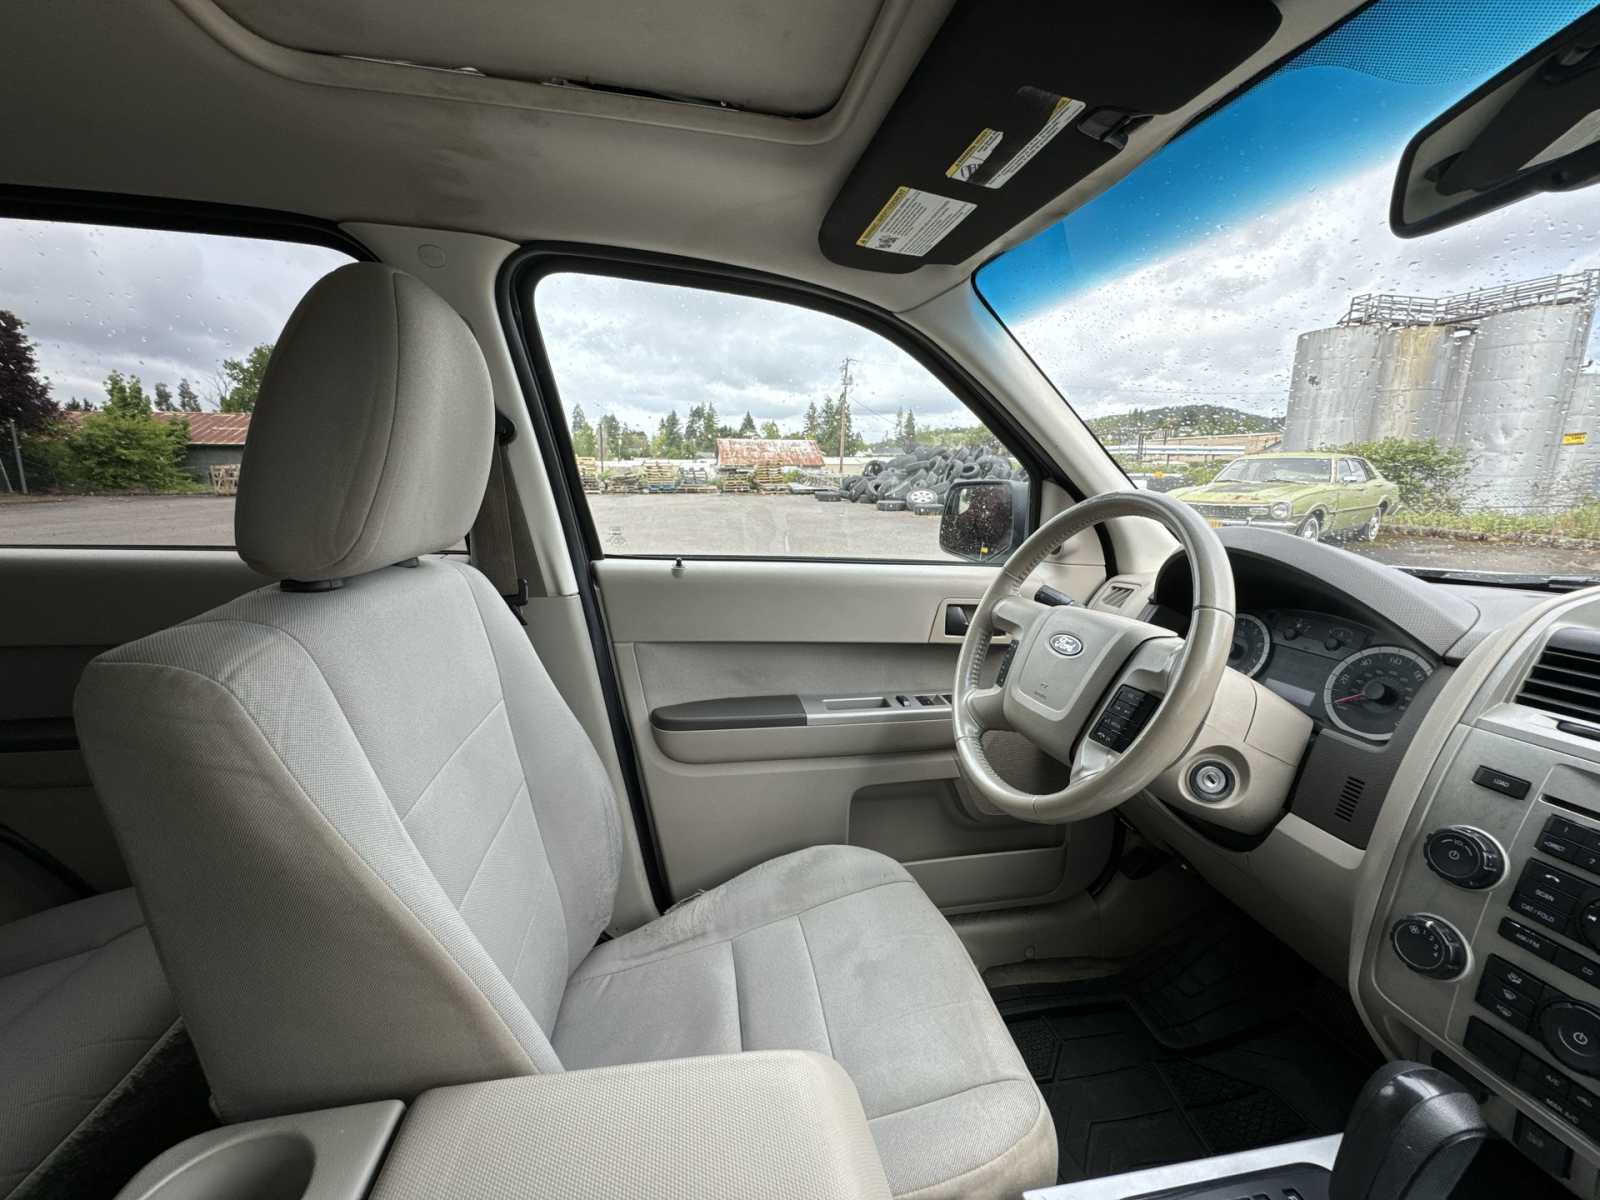 2012 Ford Escape XLT 11